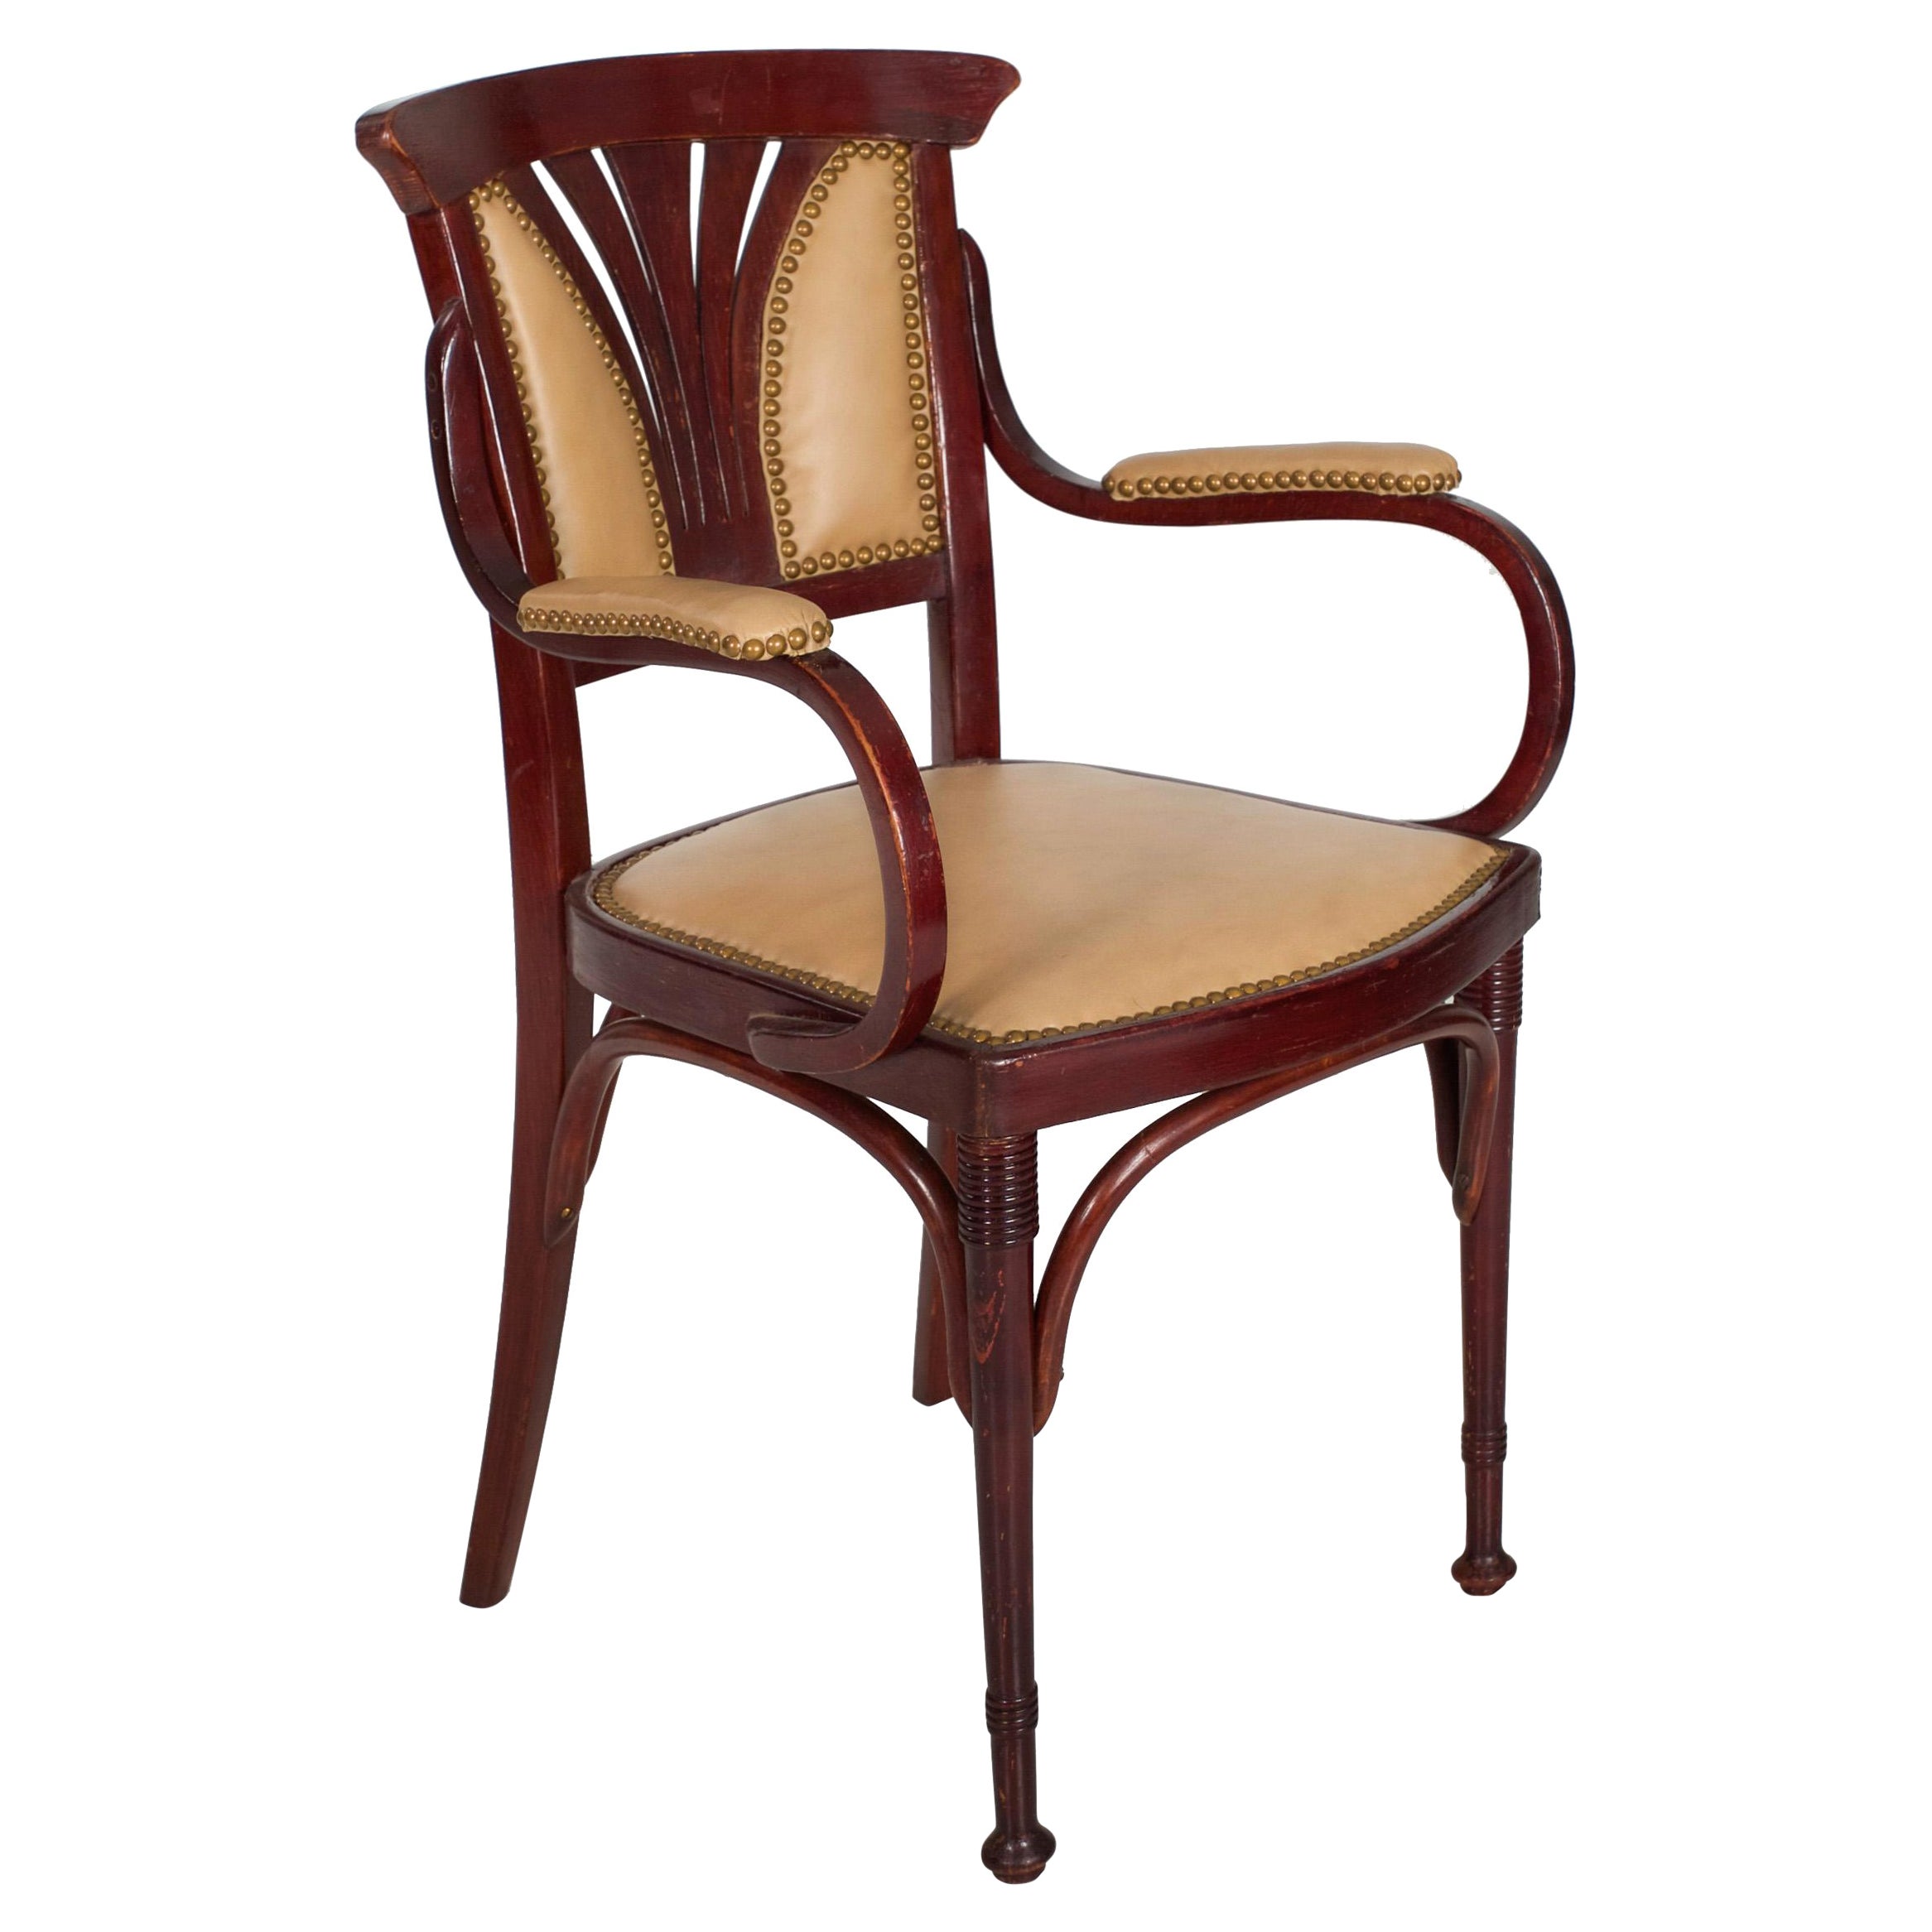 Vienna Secessionist Bentwood Arm Chair by Jacob & Josef Kohn